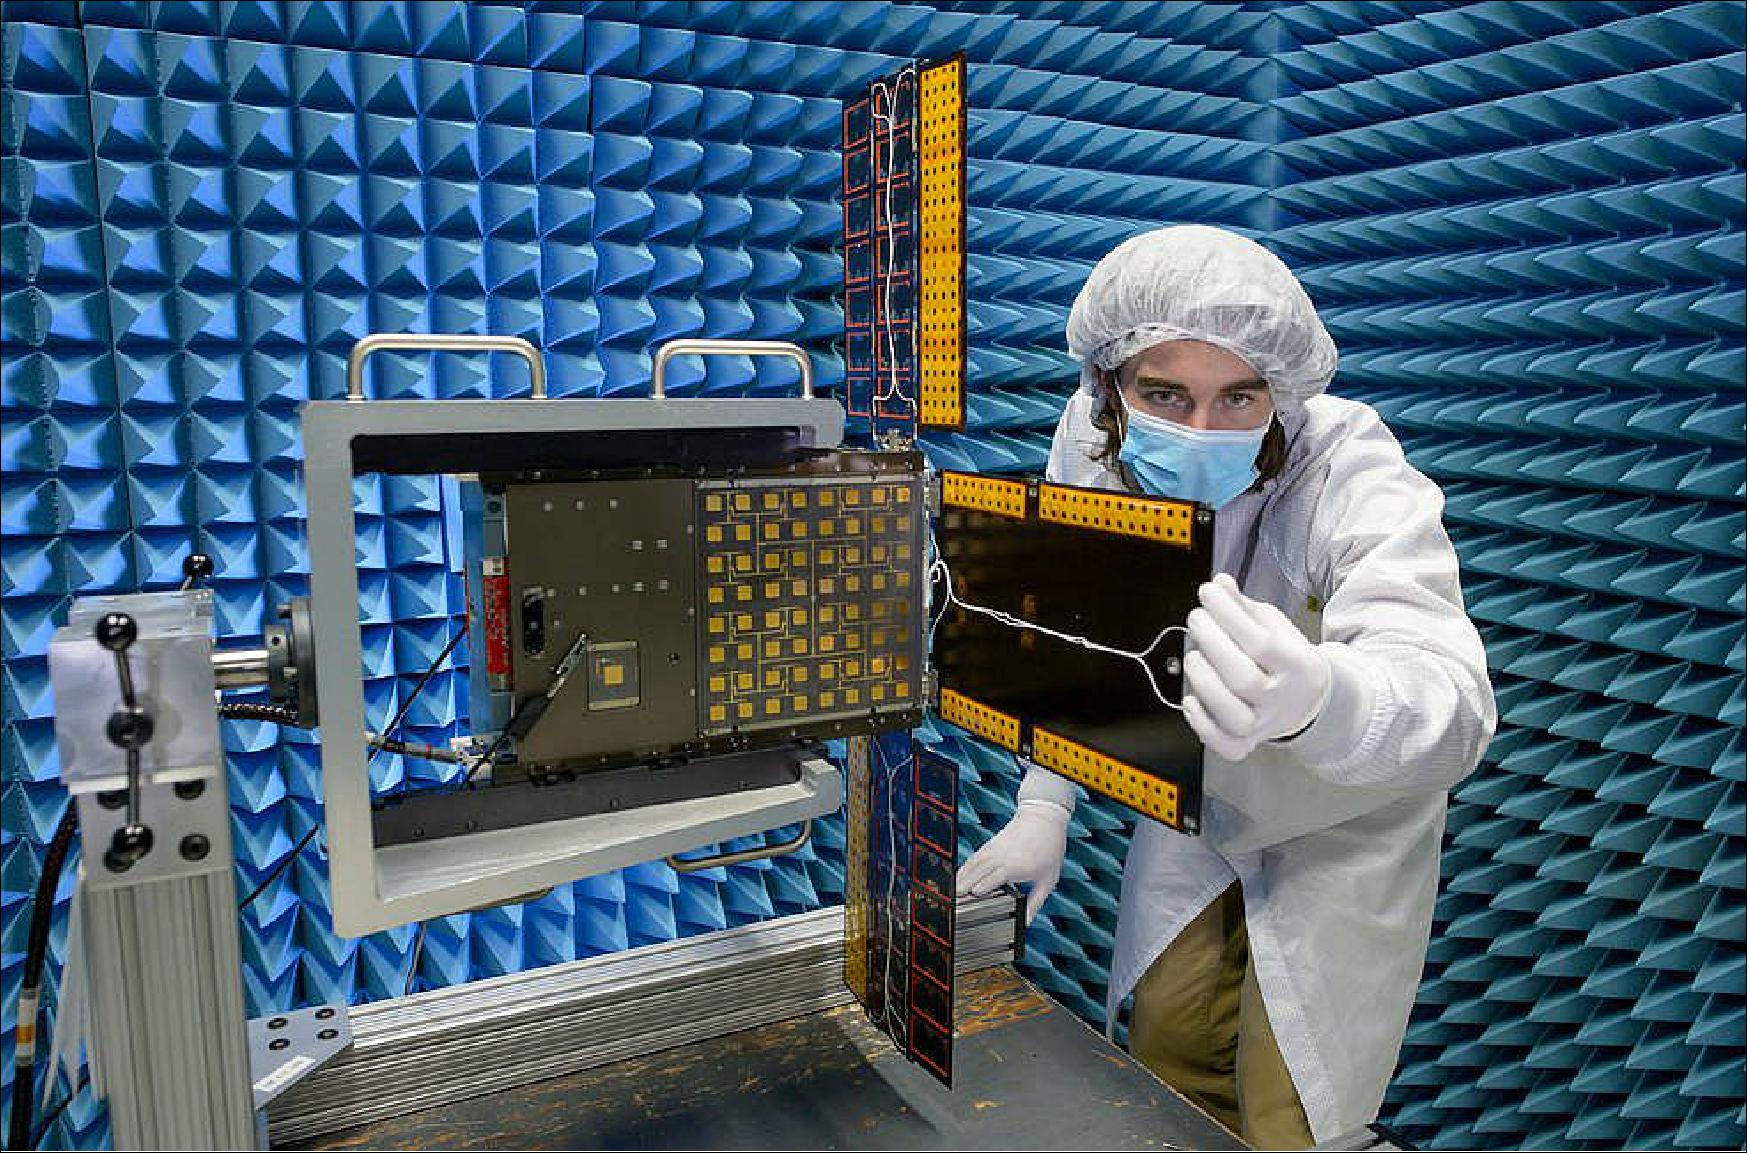 Figure 8: Here, inside an anechoic chamber at Ames, quality assurance engineer Austin Bowie inspects BioSentinel’s solar array after completion of a test to determine the effects of electromagnetic spacecraft emissions on spacecraft systems (image credit: NASA, Dominic Hart)